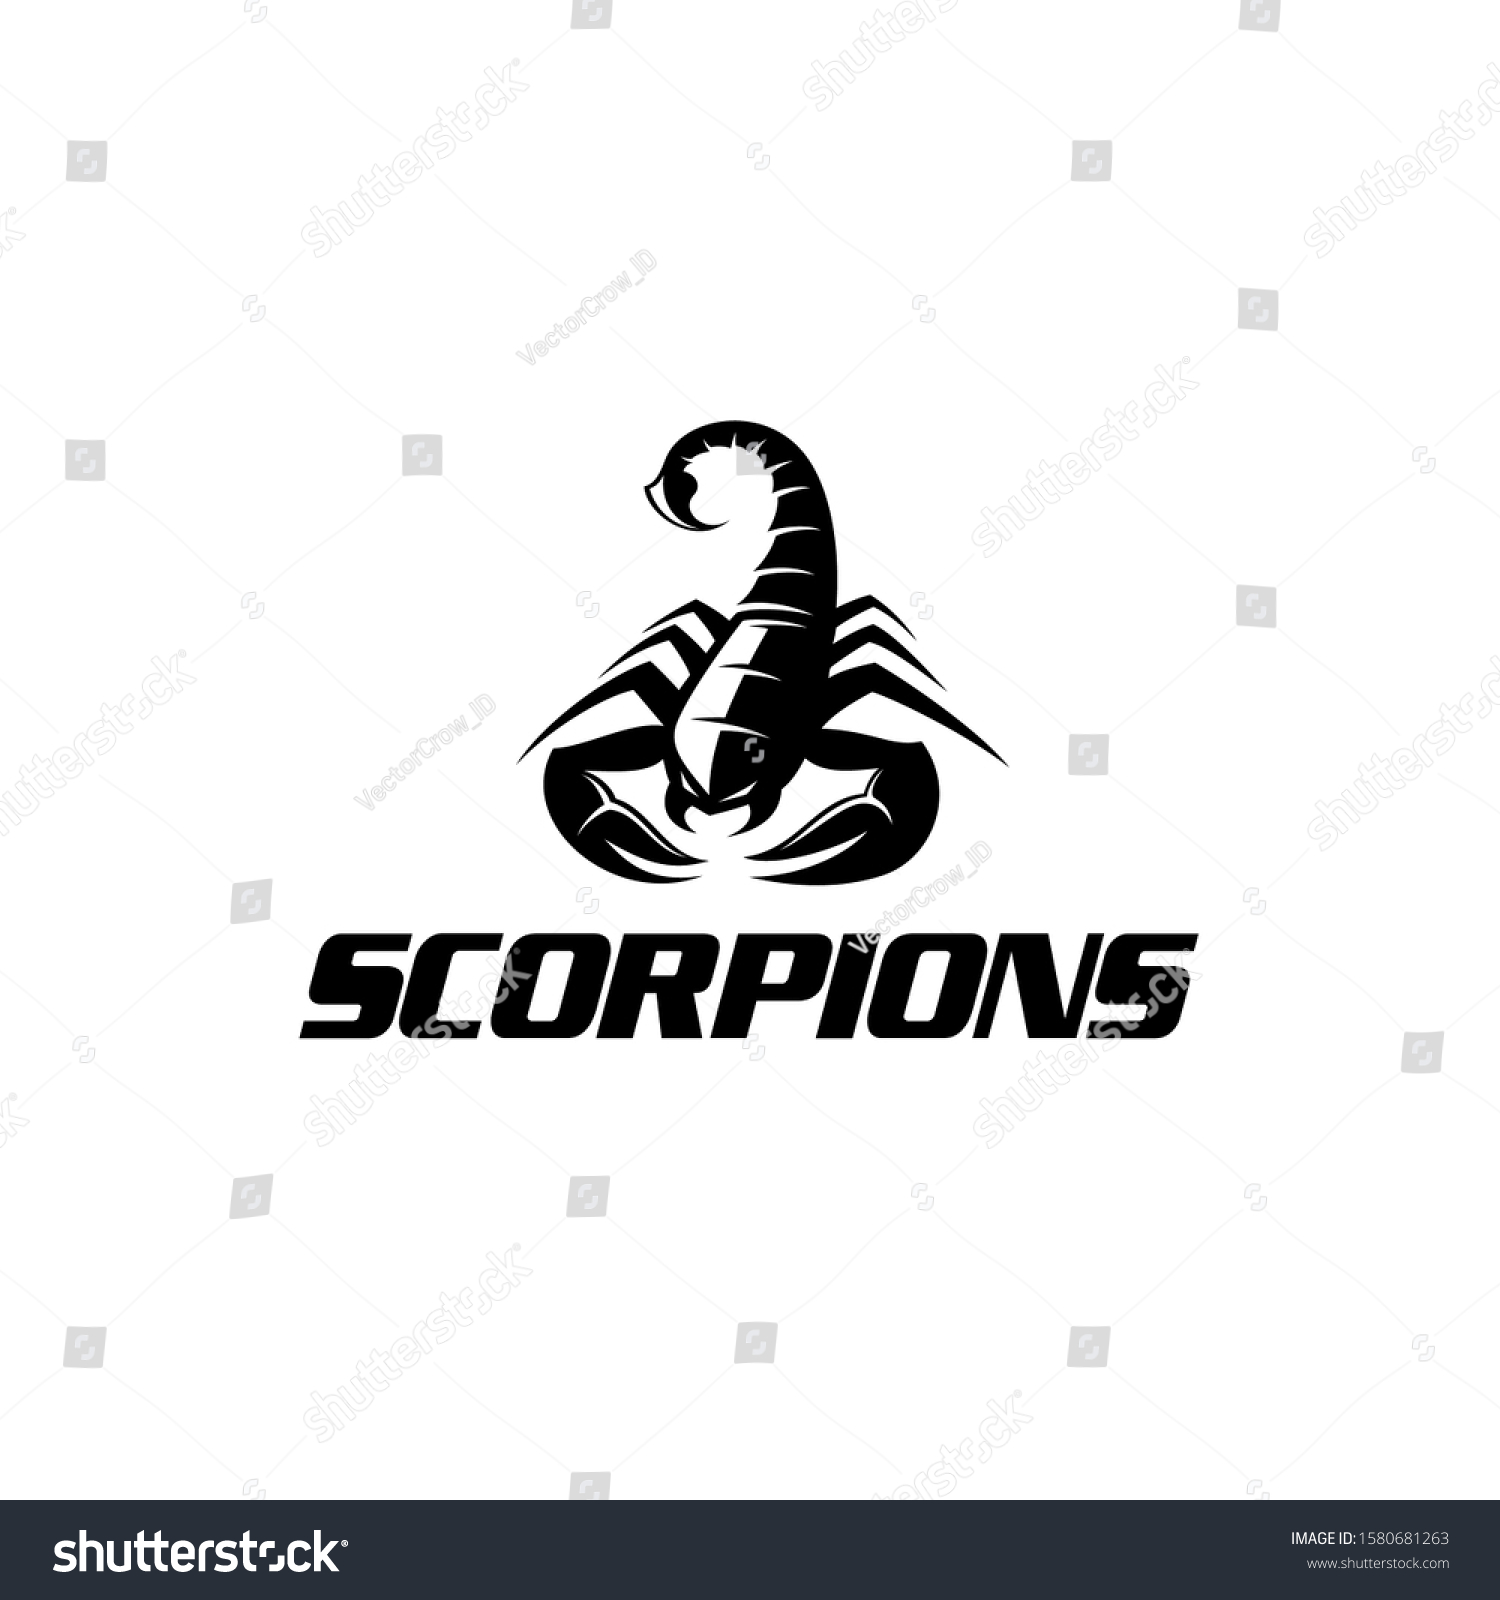 SVG of Black Scorpion - Scorpion Logo Great for Any Related Logo Brand Theme Activity or Company. svg